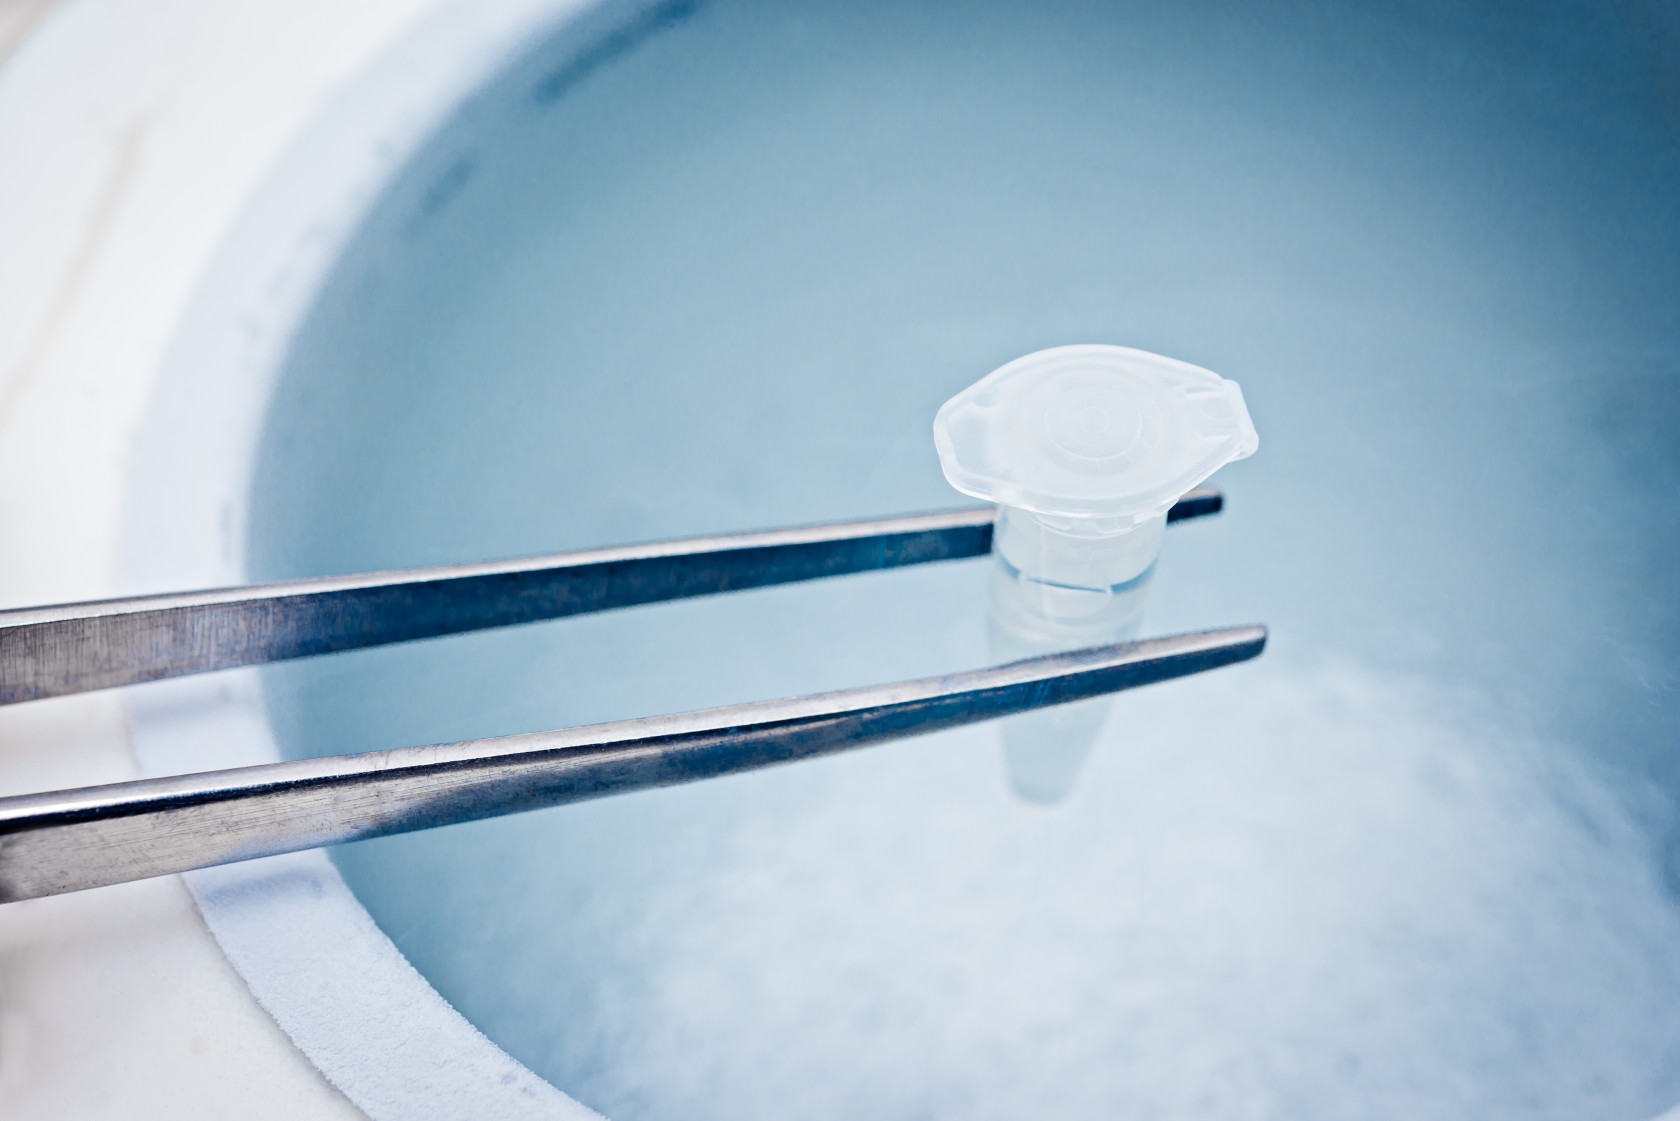 Egg Freezing – what’s your take?